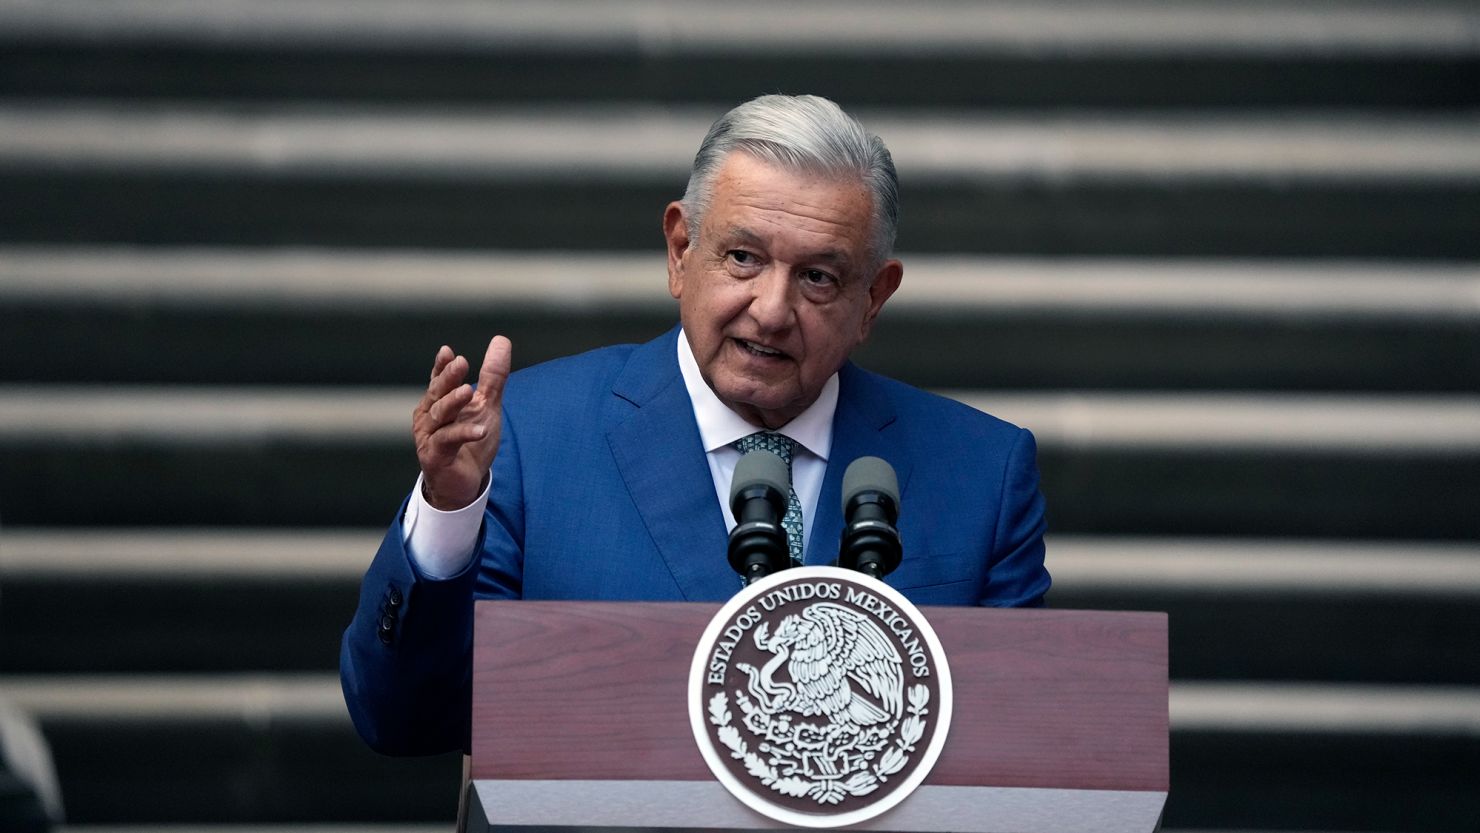 Sunday's protest comes ahead of Mexico's 2024 general election, which López Obrador cannot run in as the country's presidents are limited to one, six-year term. 